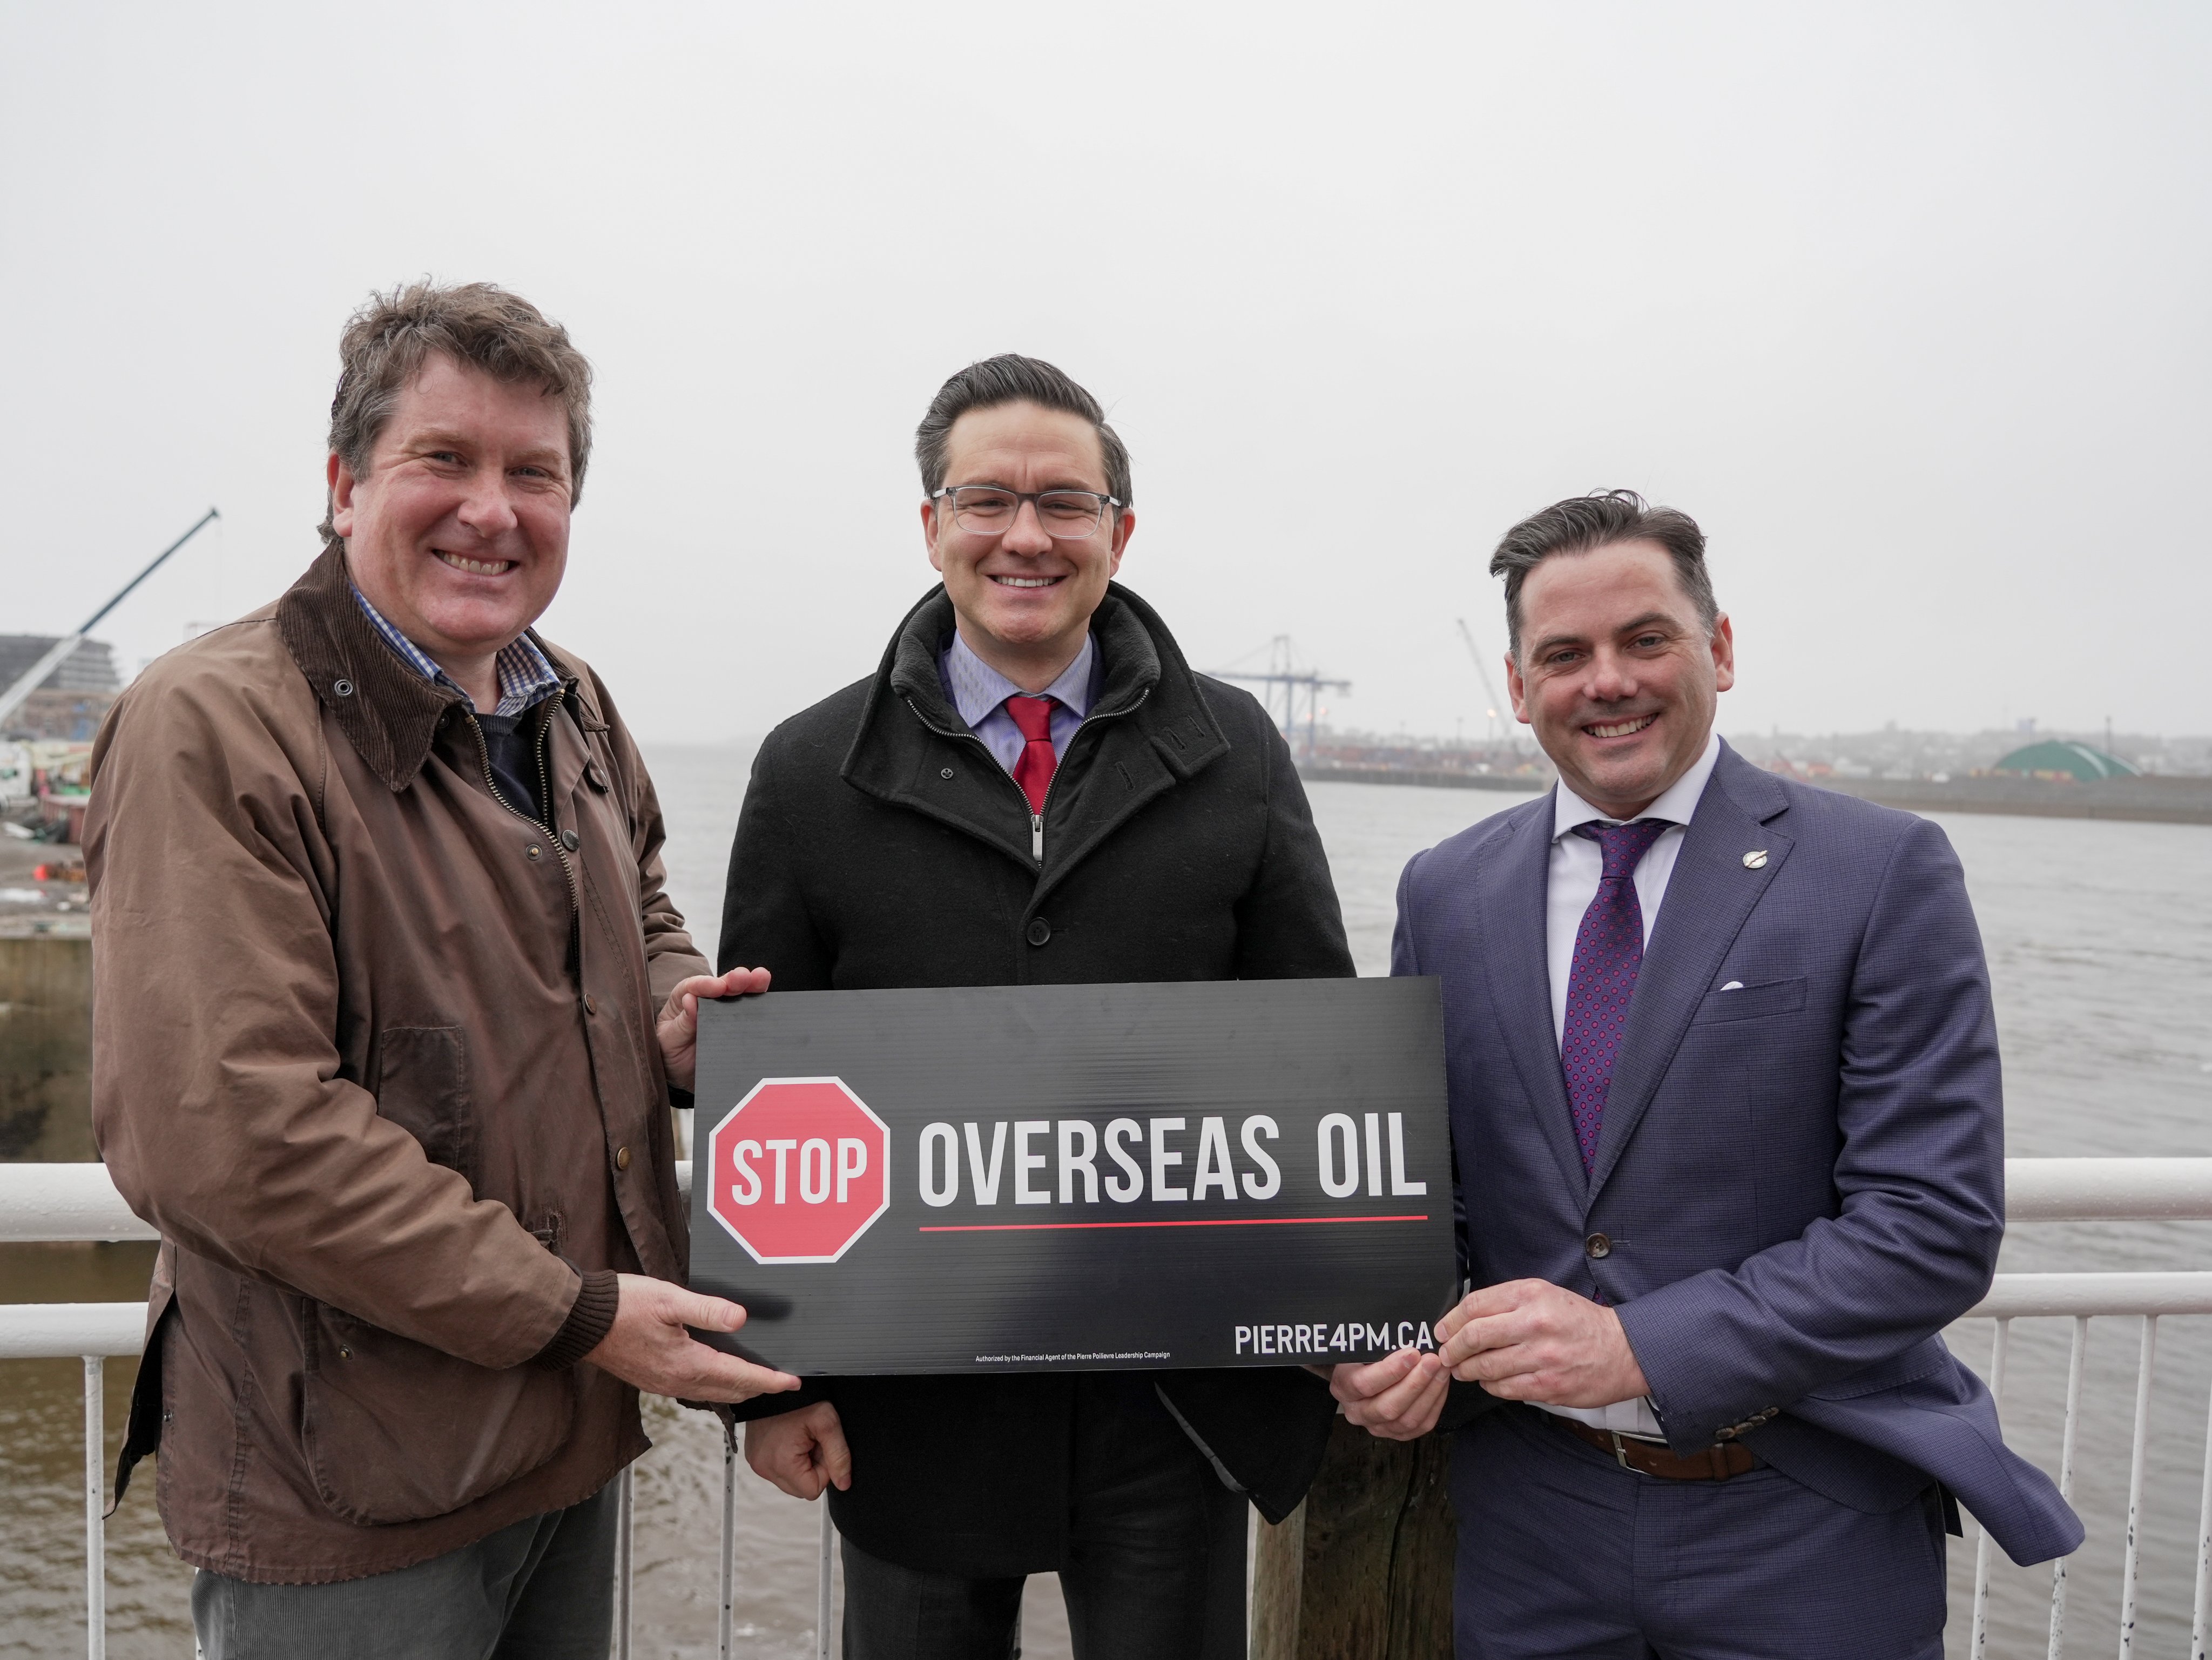 Pierre Poilievre on Twitter: "Stop foreign oil tankers. Protect our environment. Use clean Canadian energy. Sign up here to get your membership if you agree: https://t.co/d9I1ky9w2t https://t.co/6Ey1tyvnHn" / Twitter